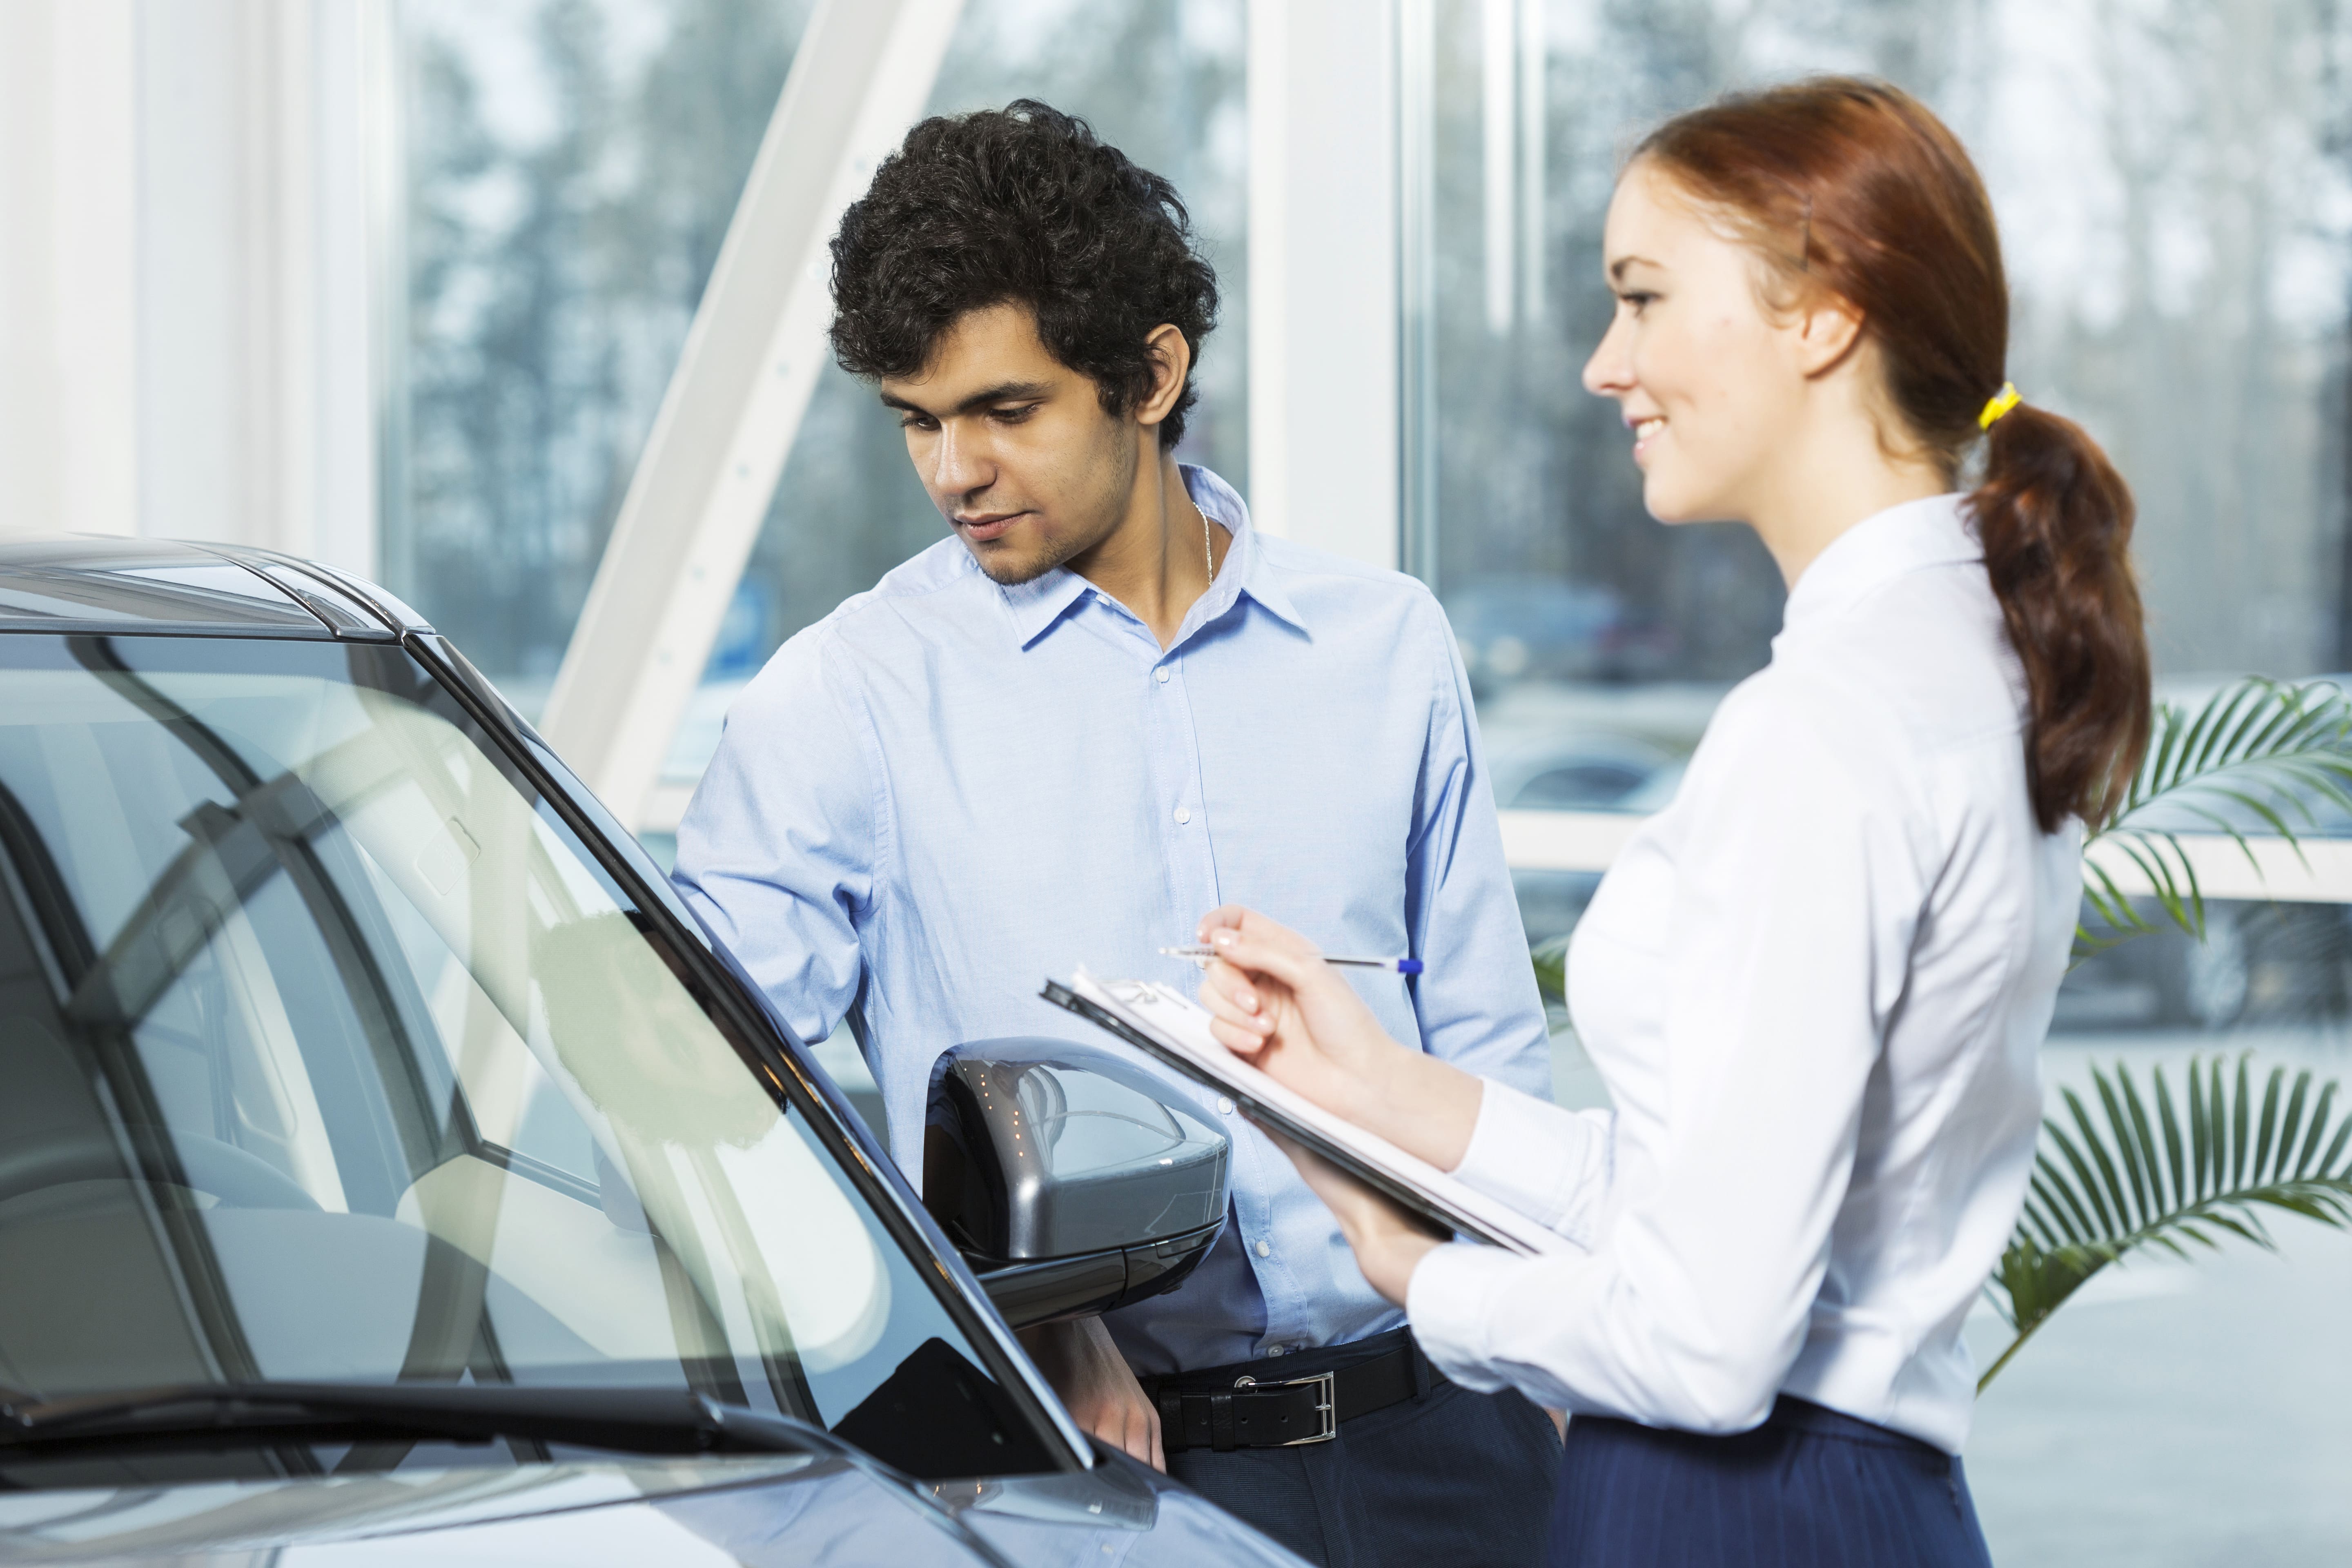 Rent a car service with agent and customer